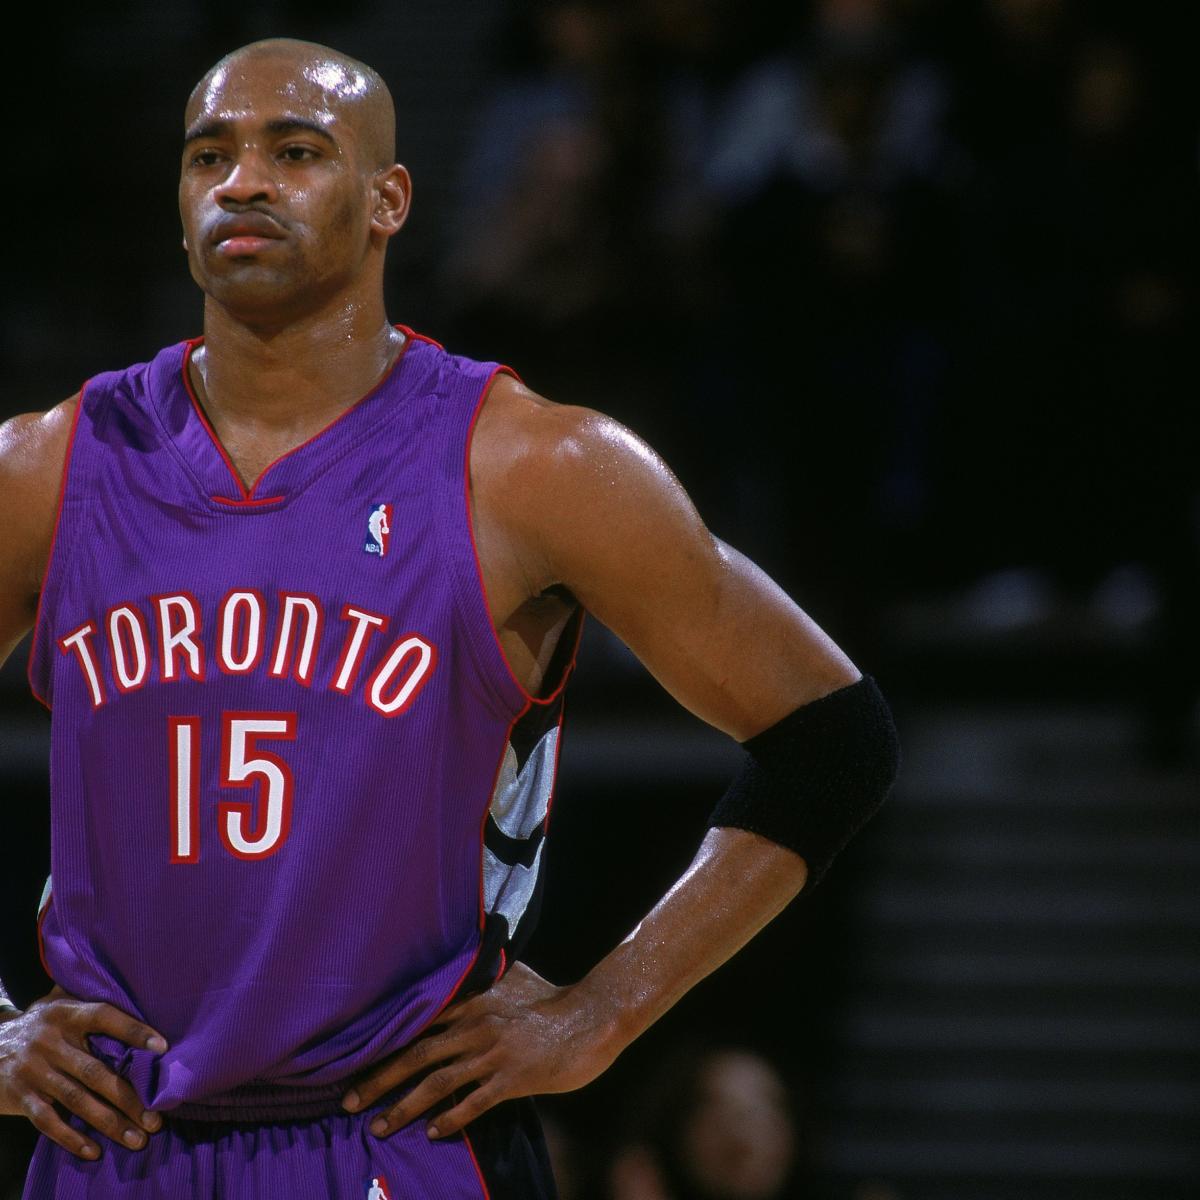 Vince Carter Dunk Contest: His Performance in 2000 + Vinsanity